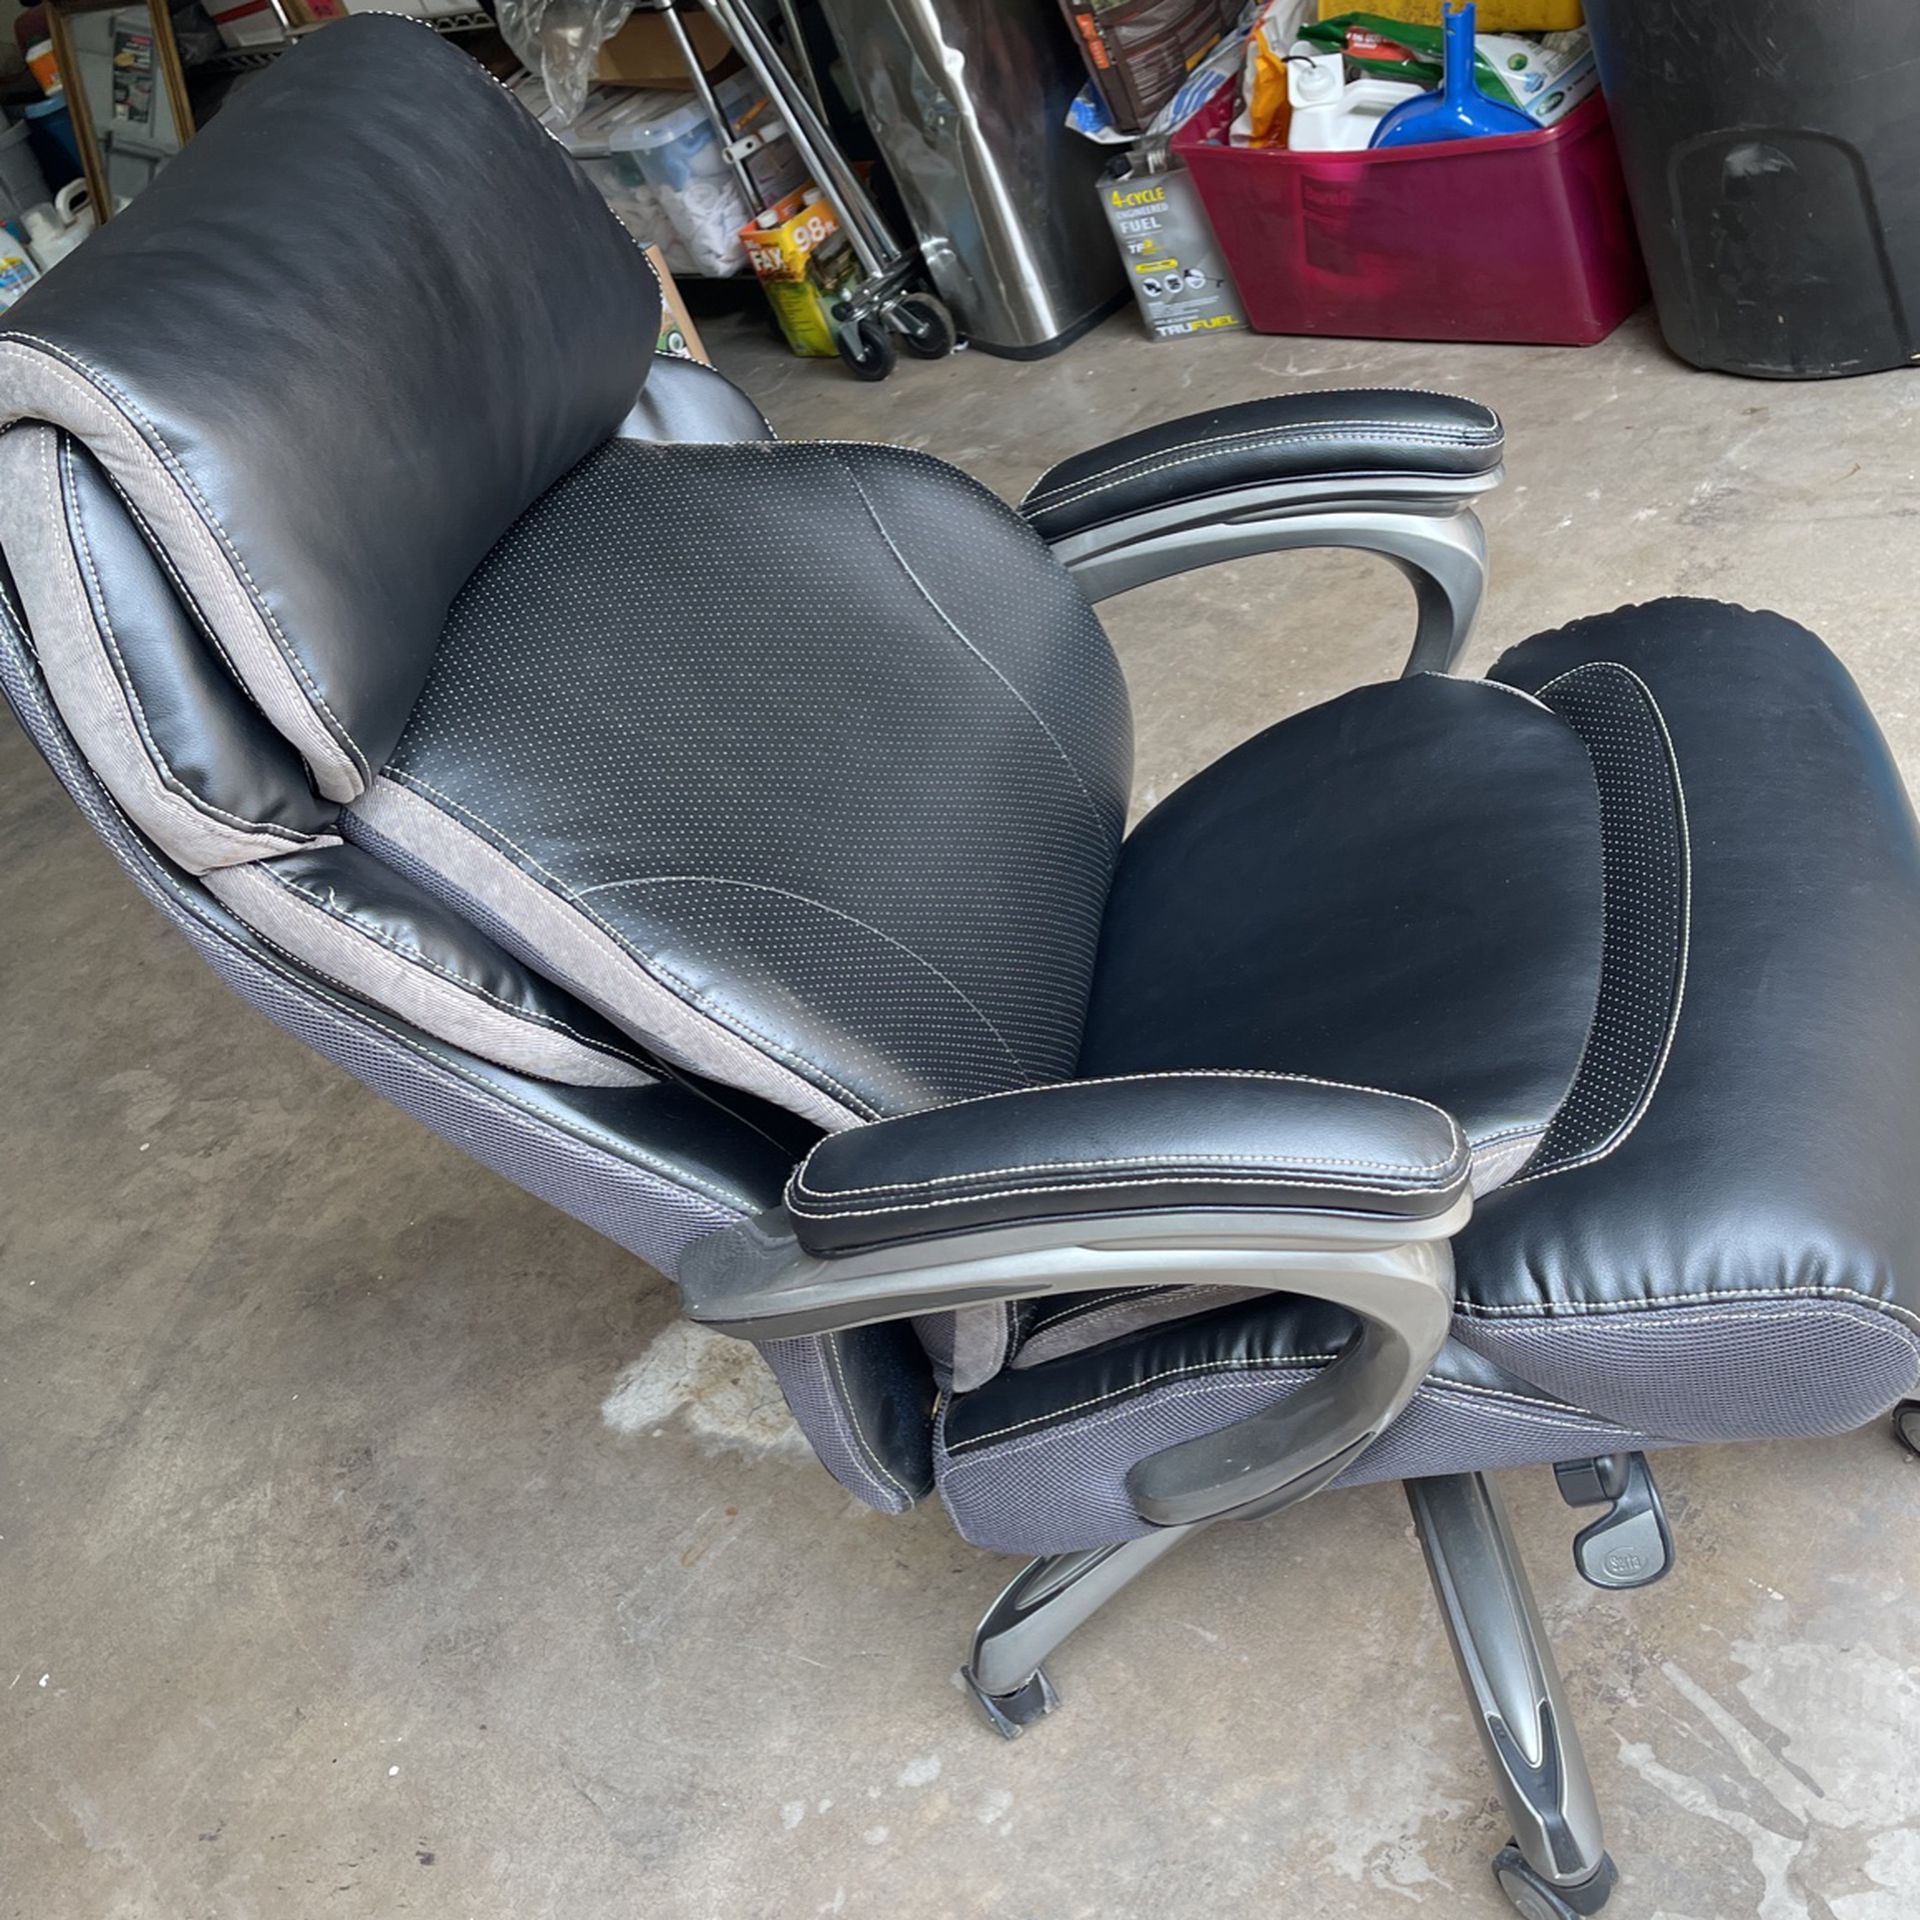 Serta Office Chair ,brand New Never Used Very Comfy And Padded  Goes All the Way Back.